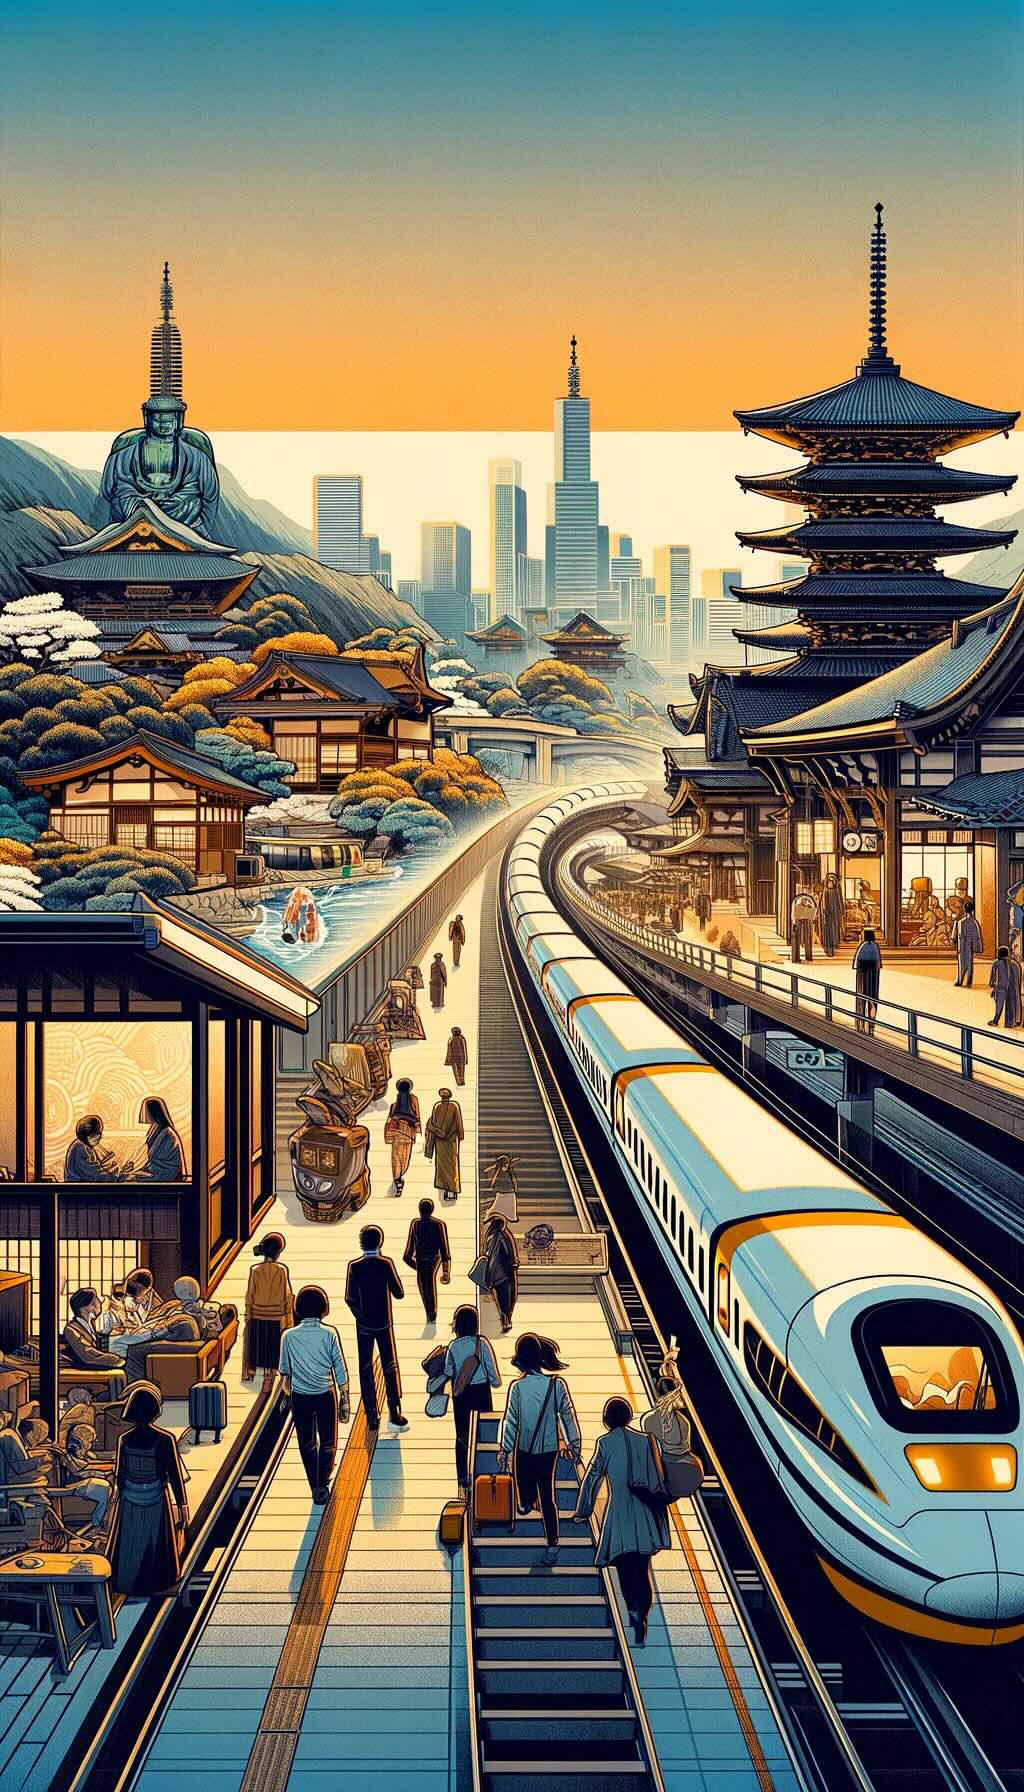 Depicting the historical and cultural significance of the Japan Rail Pass